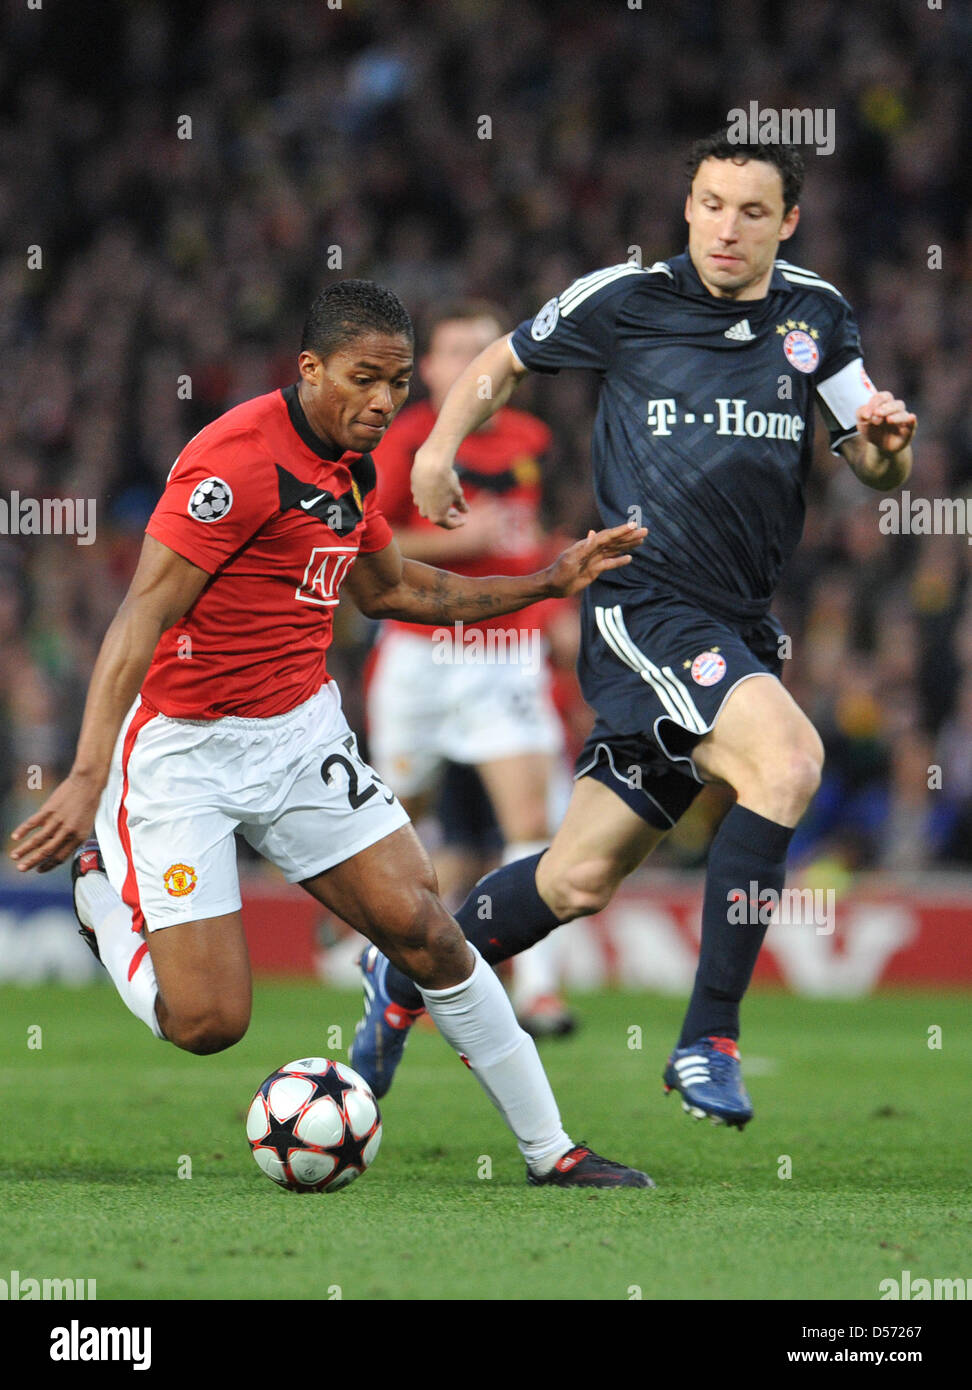 United's Antonio Valencia (L) and Munich's Mark van Bommel (R) vie for the ball during UEFA Champions League quarter-final match Manchester United vs Bayern Munich at Old Trafford stadium in Manchester, Great Britain, 07 April 2010. Manchester United won the second leg 3-2, yet Munich moves up to semi-final winning 4-4 on aggregate and away goals. Photo: ANDREAS GEBERT Stock Photo